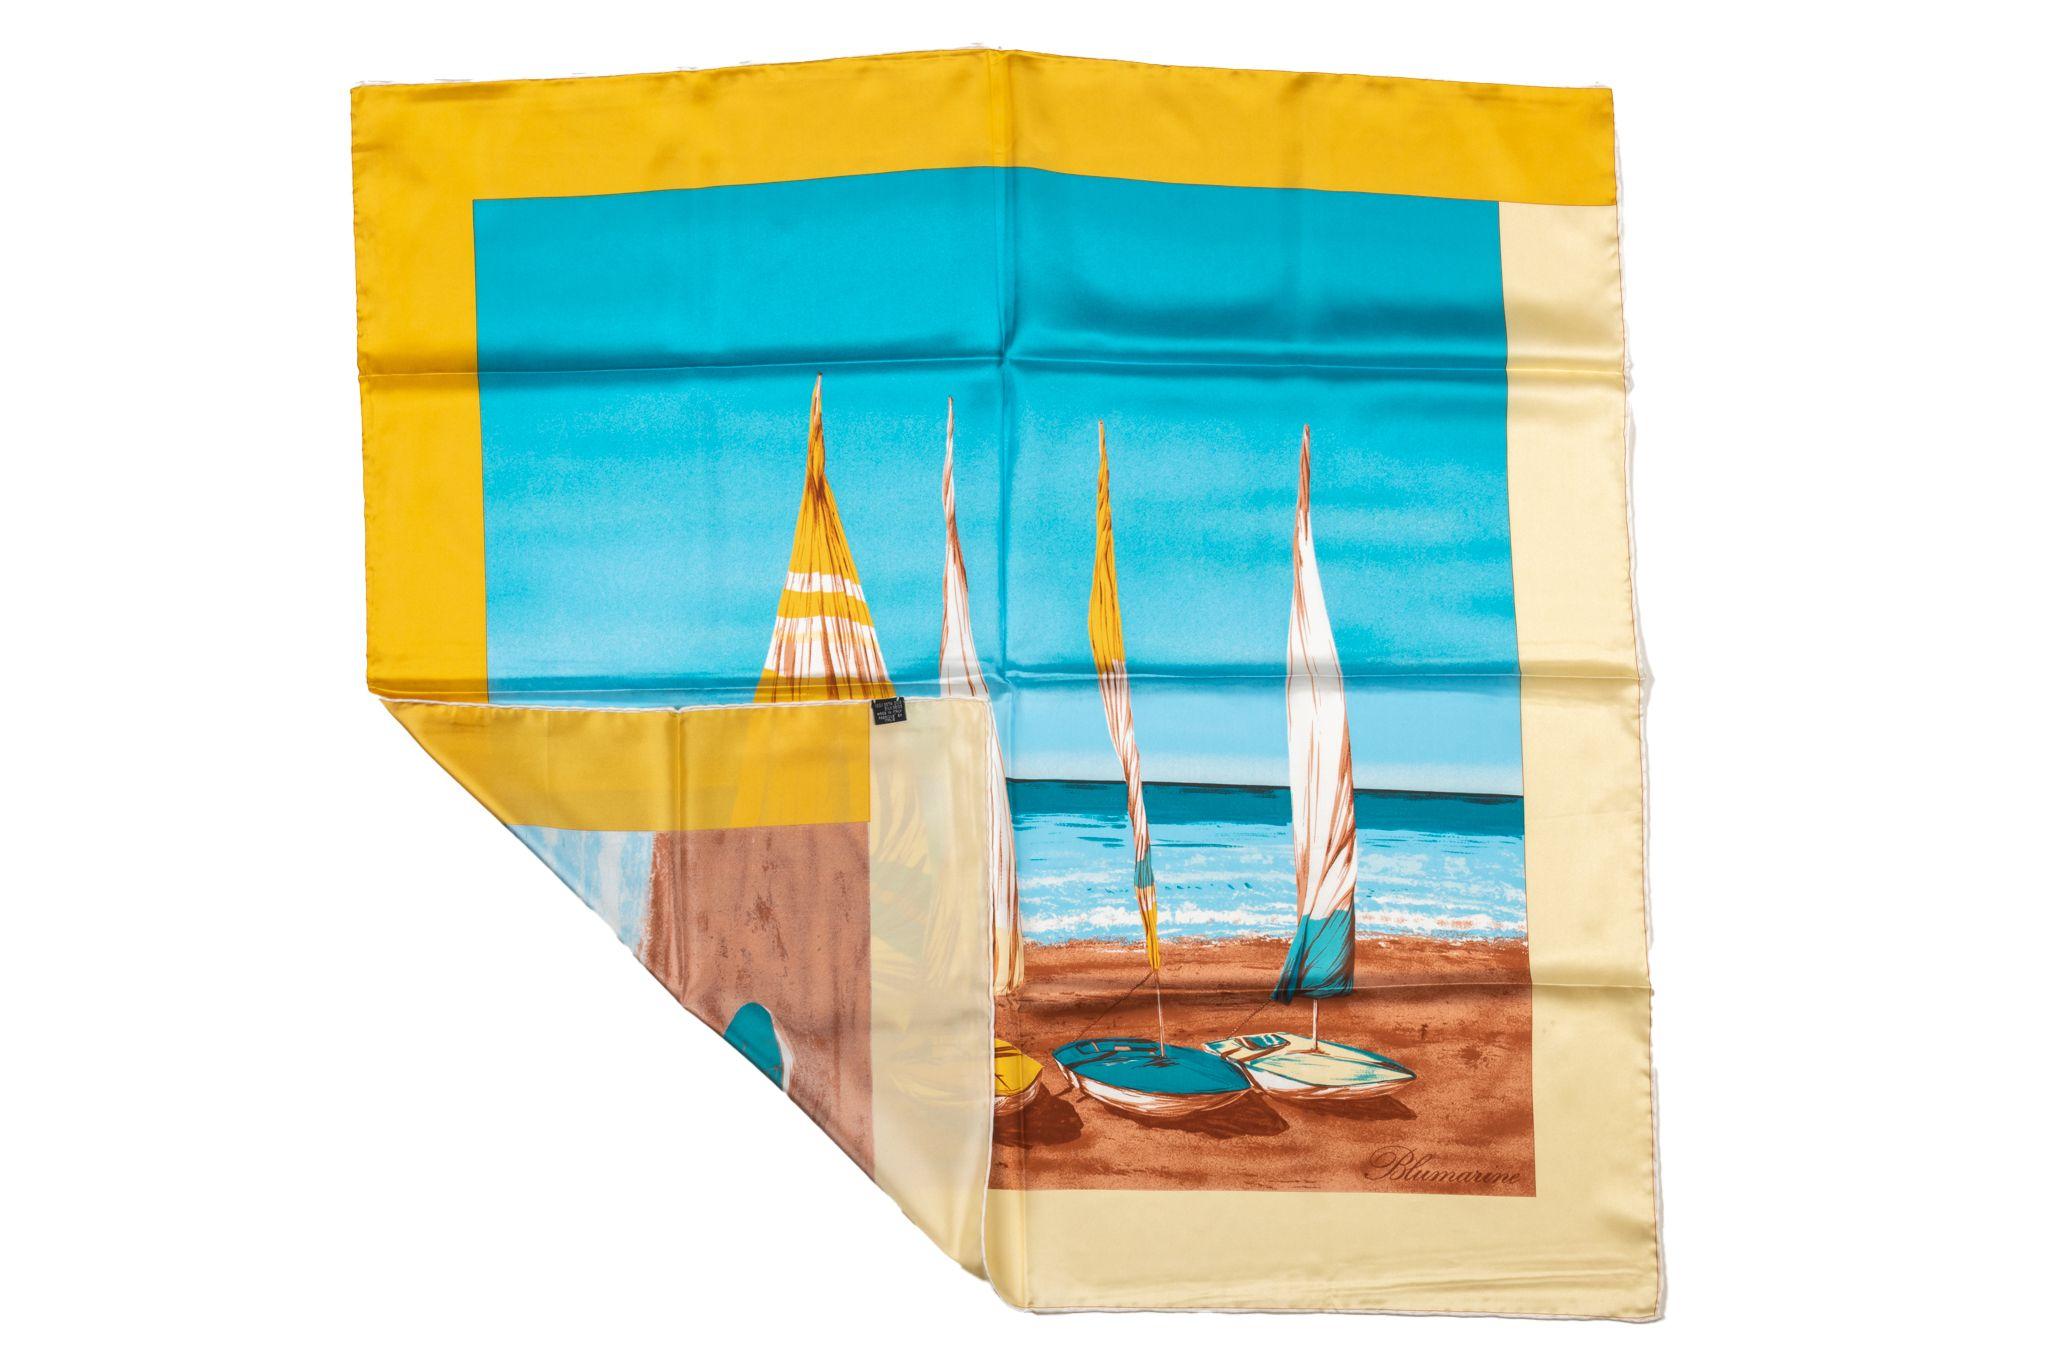 Blumarine Vintage Sail Silk Scarf. The frame is yellow while the pattern in the middle features different sailing boats. Item is in excellent condition.